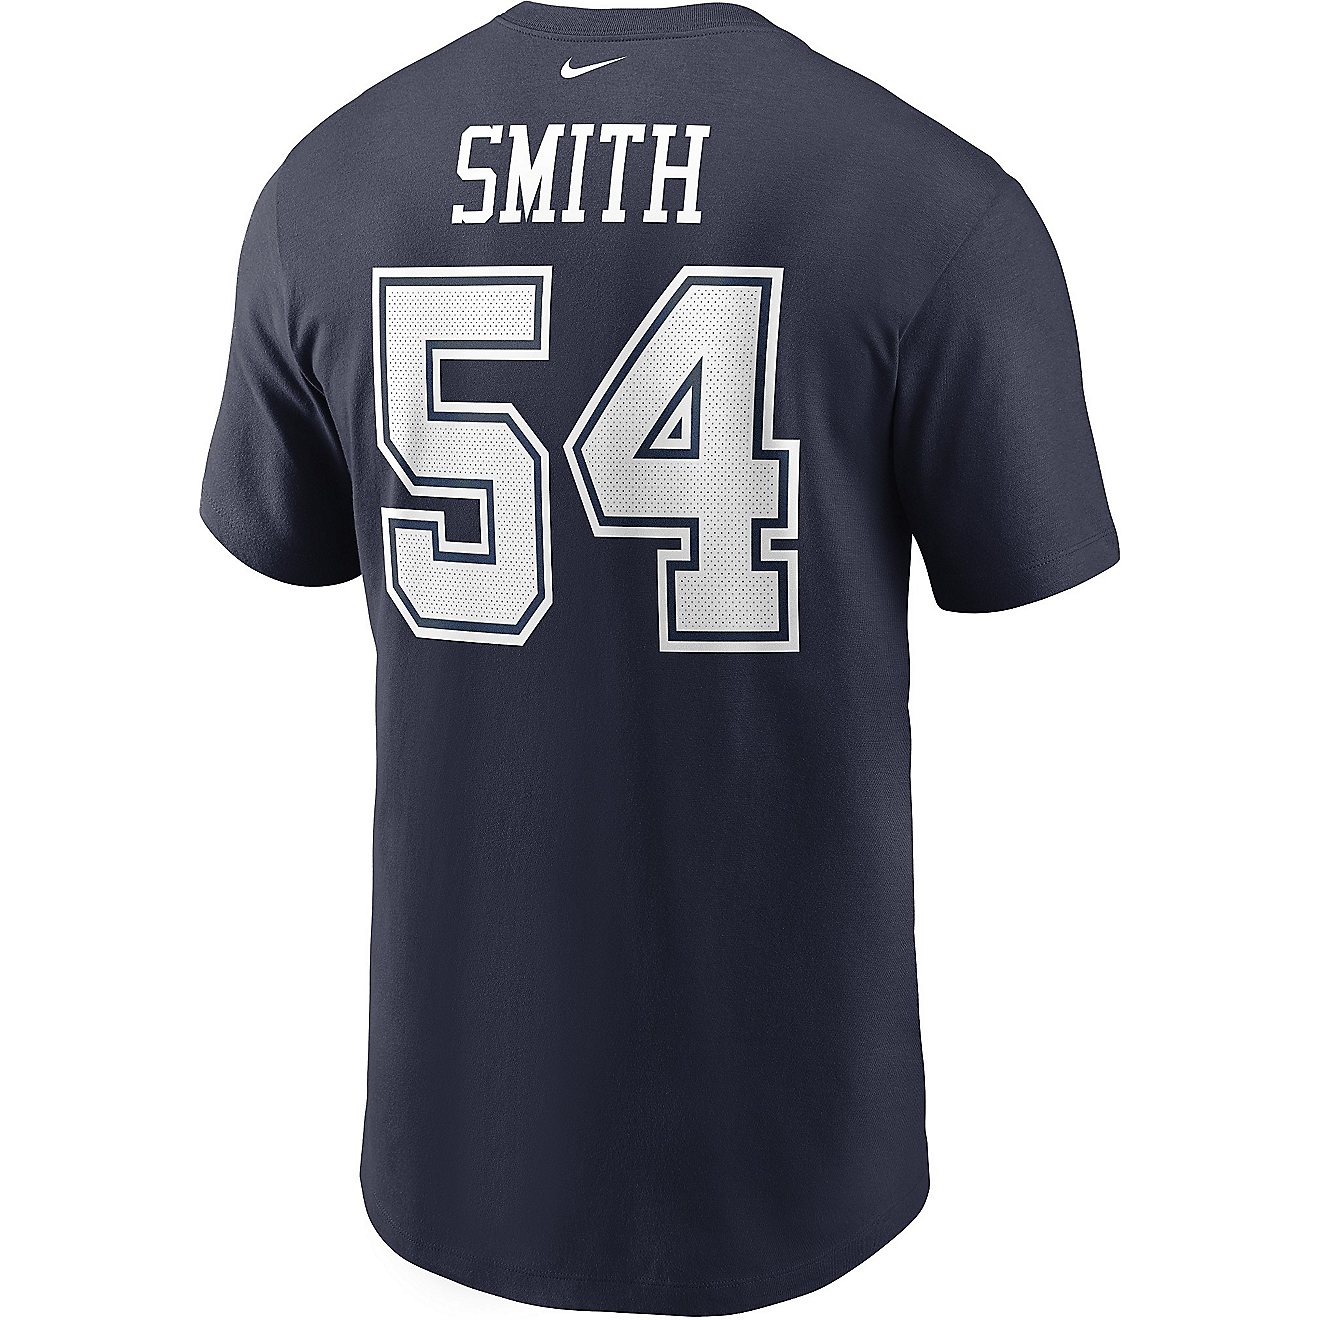 Nike Men's Dallas Cowboys Smith Name & Number Graphic T-shirt                                                                    - view number 1